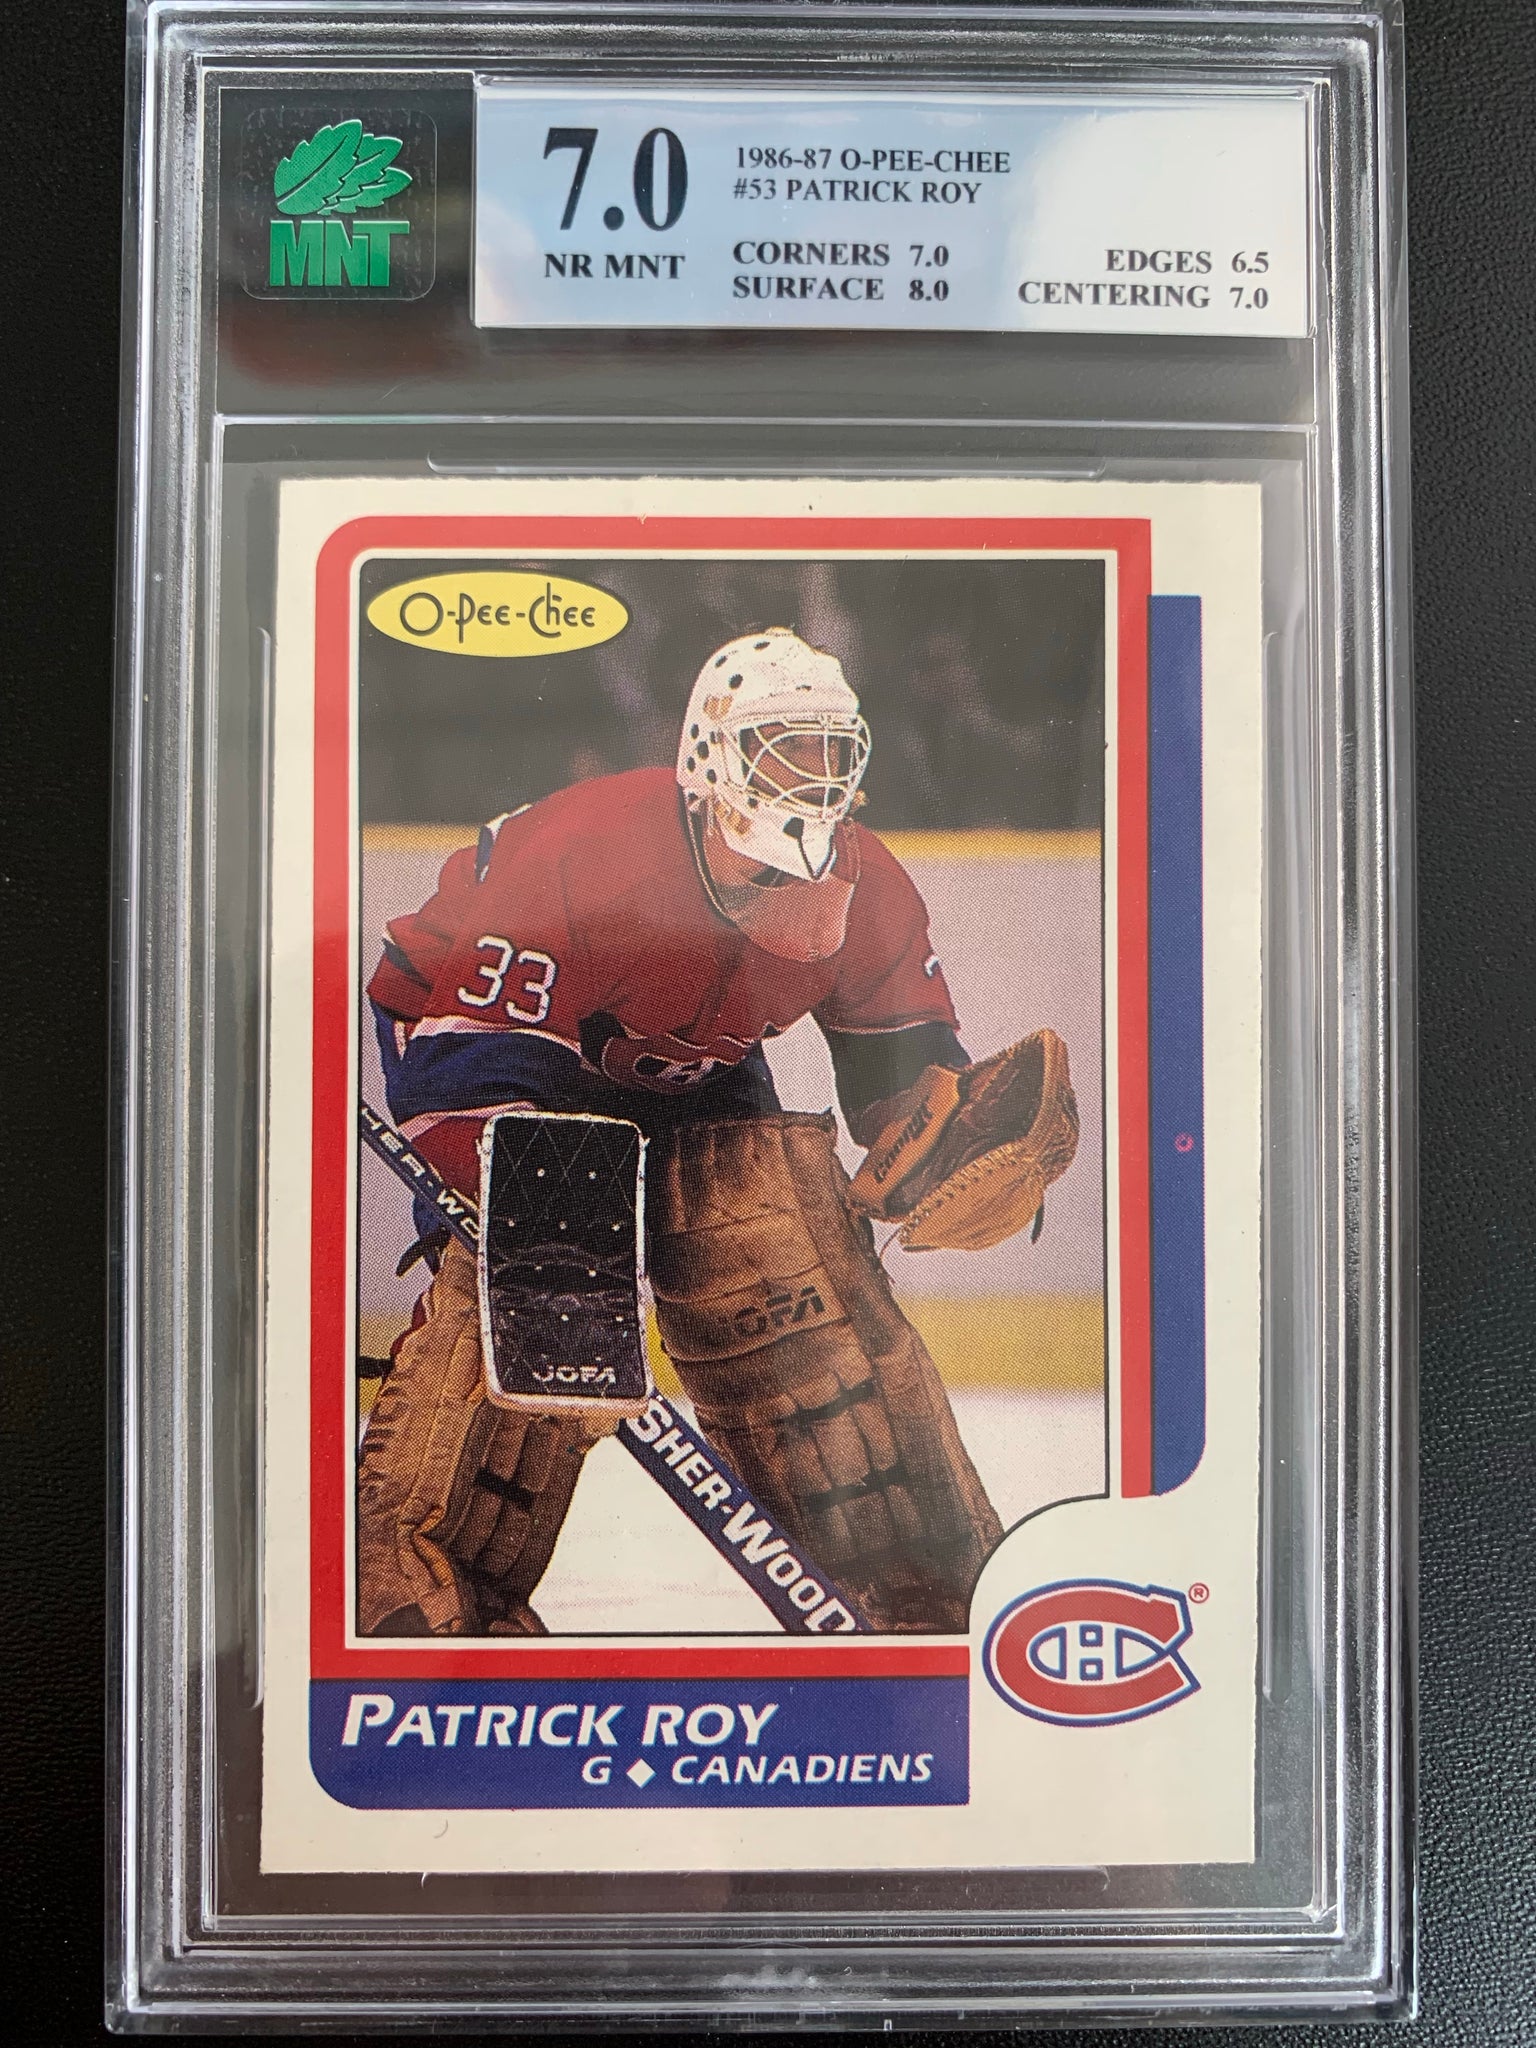 1986-87 O-PEE-CHEE HOCKEY #53 MONTREAL CANADIENS - PATRICK ROY ROOKIE CARD GRADED MNT 7.0 NR MINT